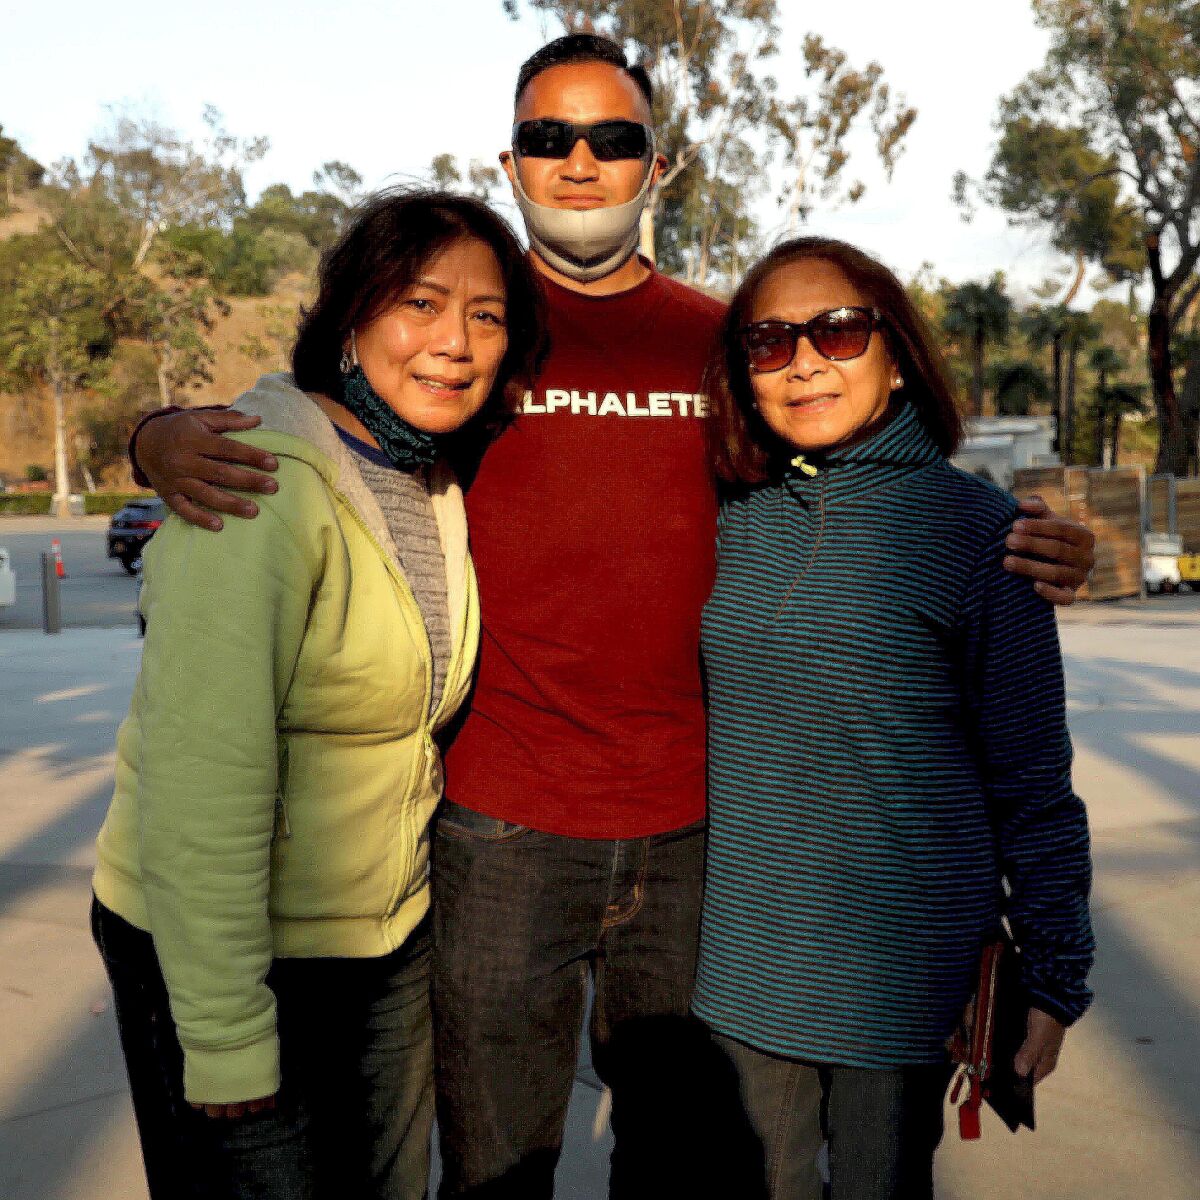 A man and two women pose for a photo.